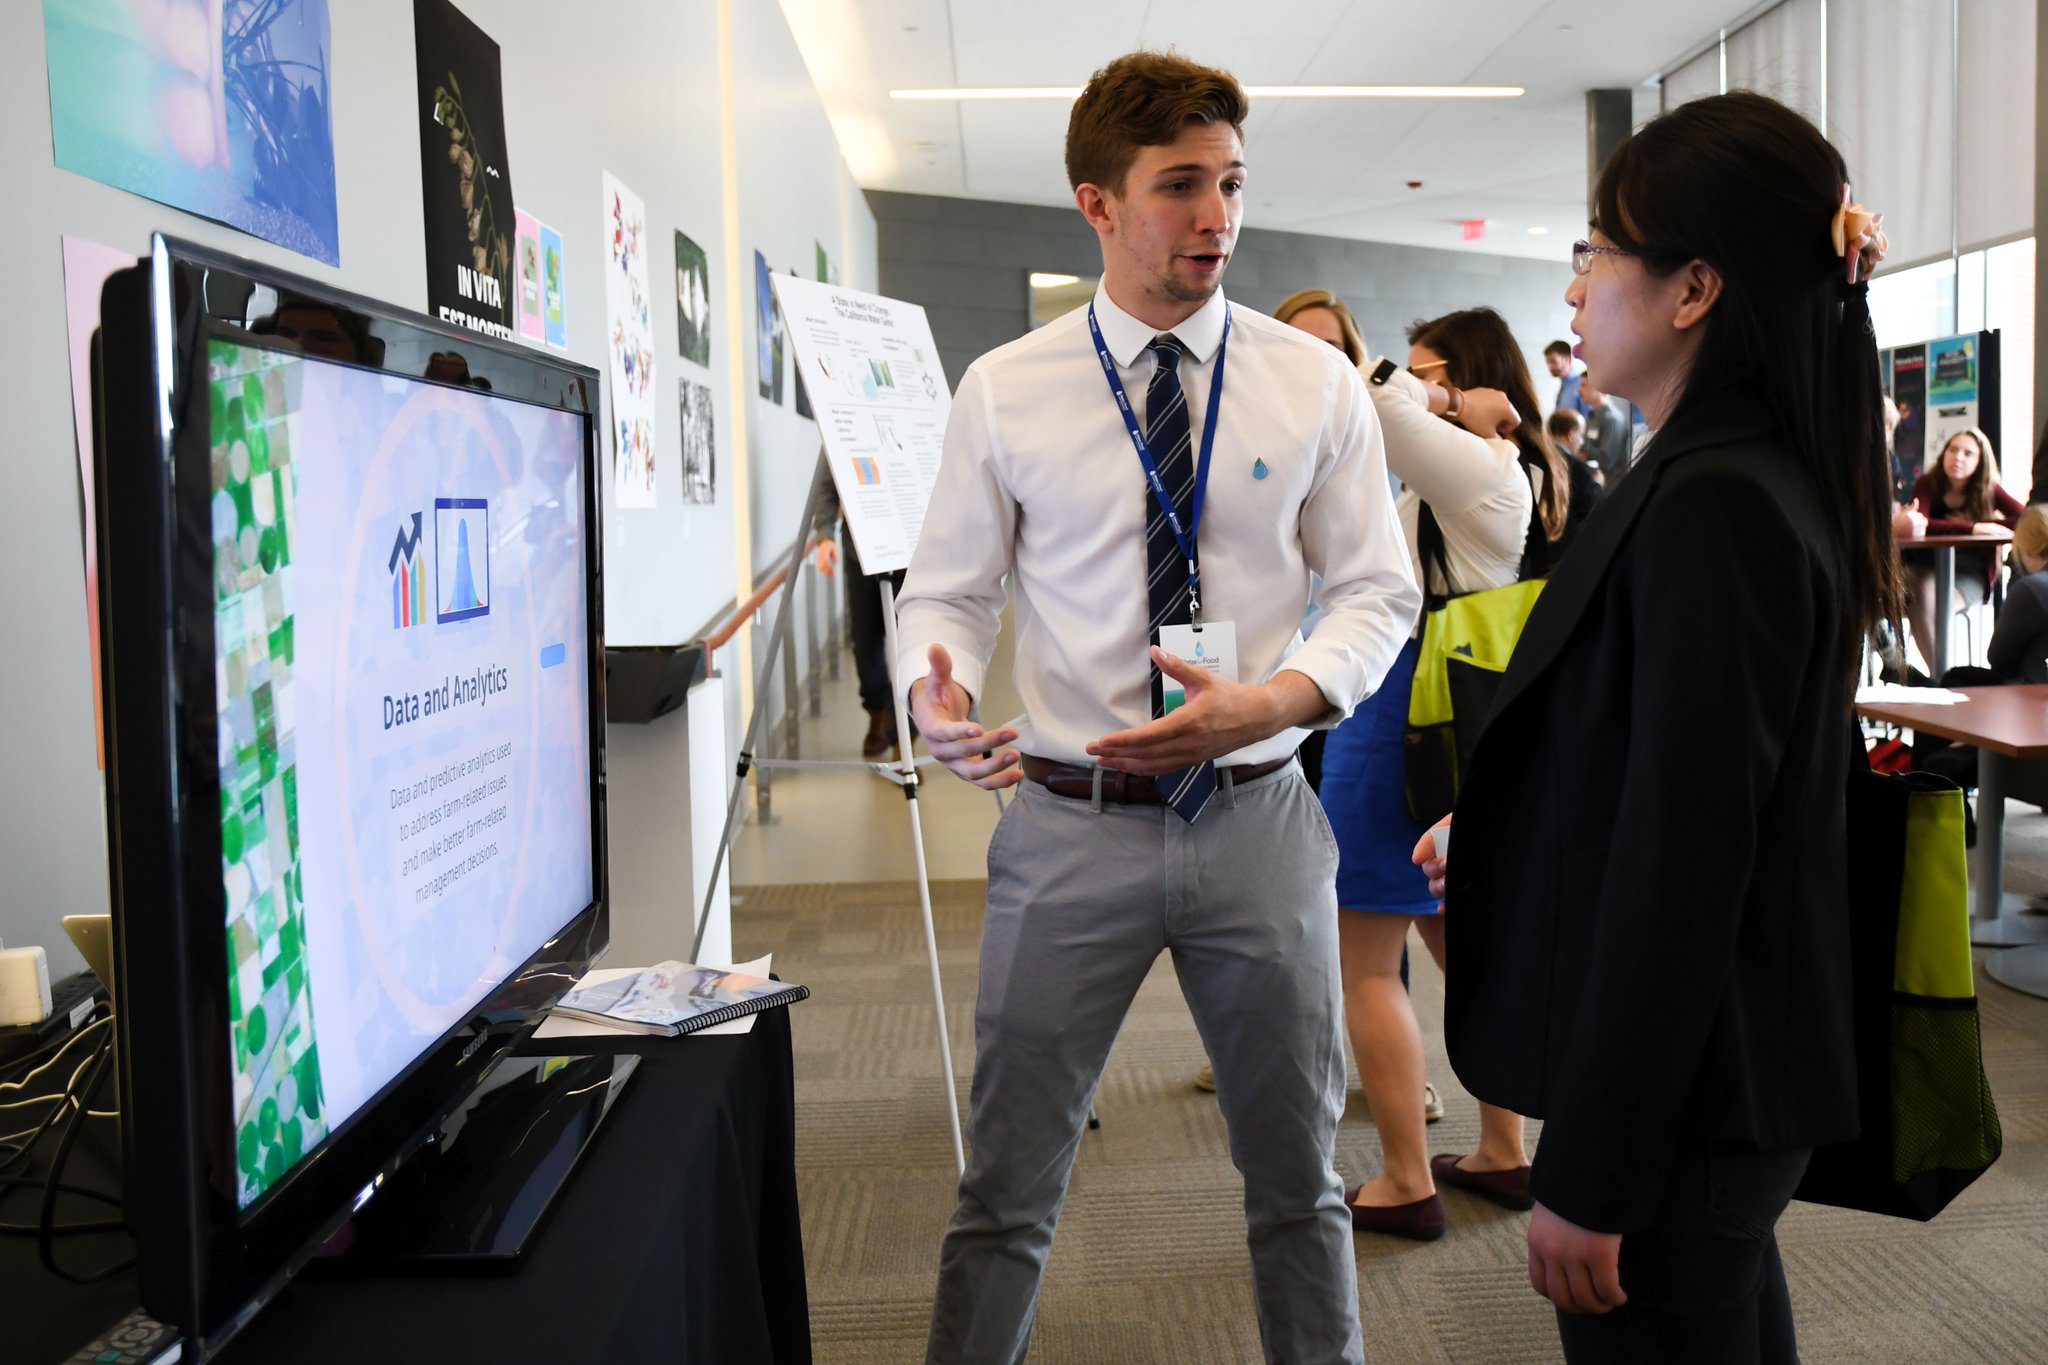 DWFI Intern Will Ruffalo shares his research during the 2017 DWFI Water for Food Global Conference. Photo Credit: Brett Hampton